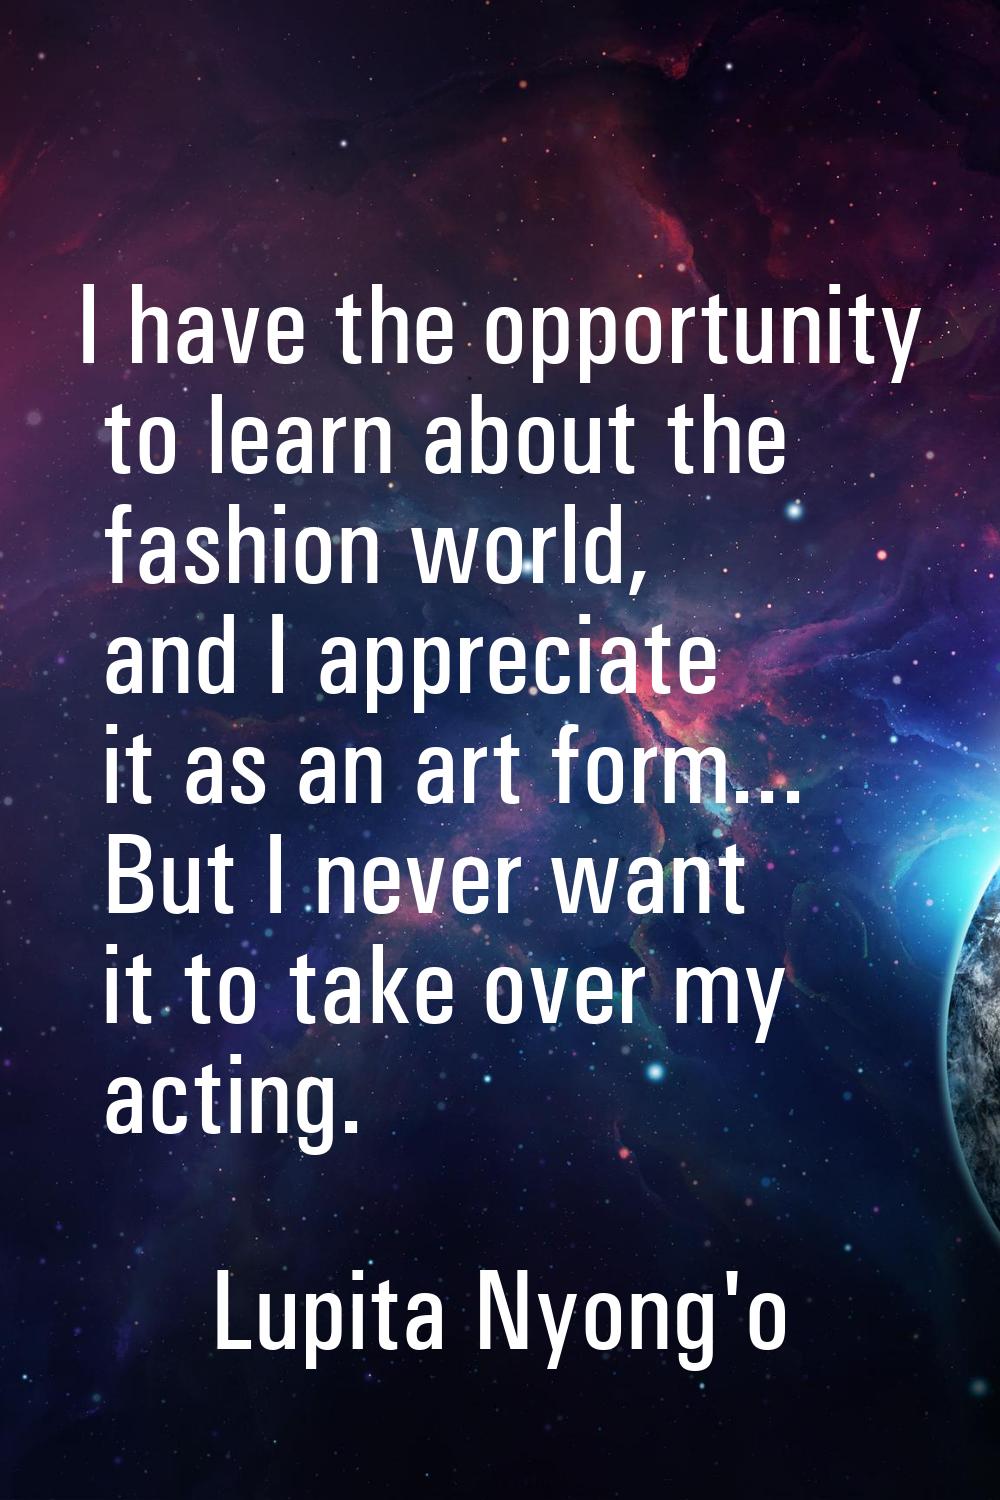 I have the opportunity to learn about the fashion world, and I appreciate it as an art form... But 